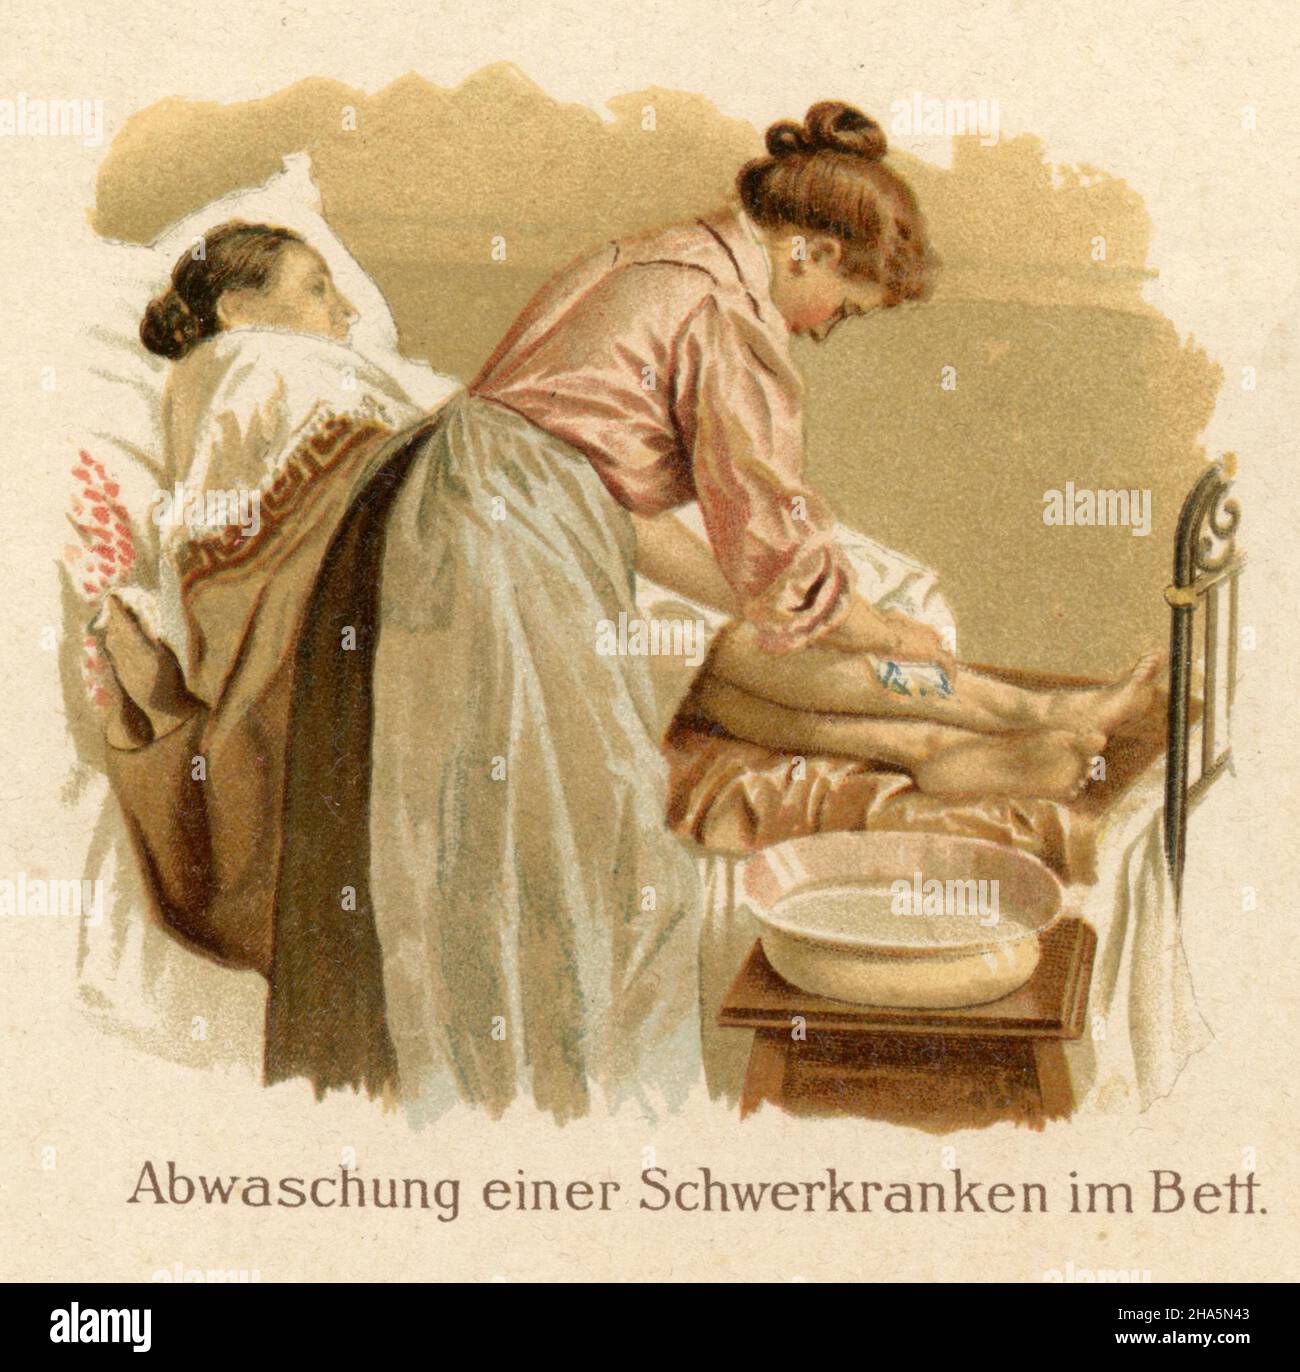 Water applications in nursing: washing up a seriously ill person in bed ,  (medicine book, 1905) Stock Photo